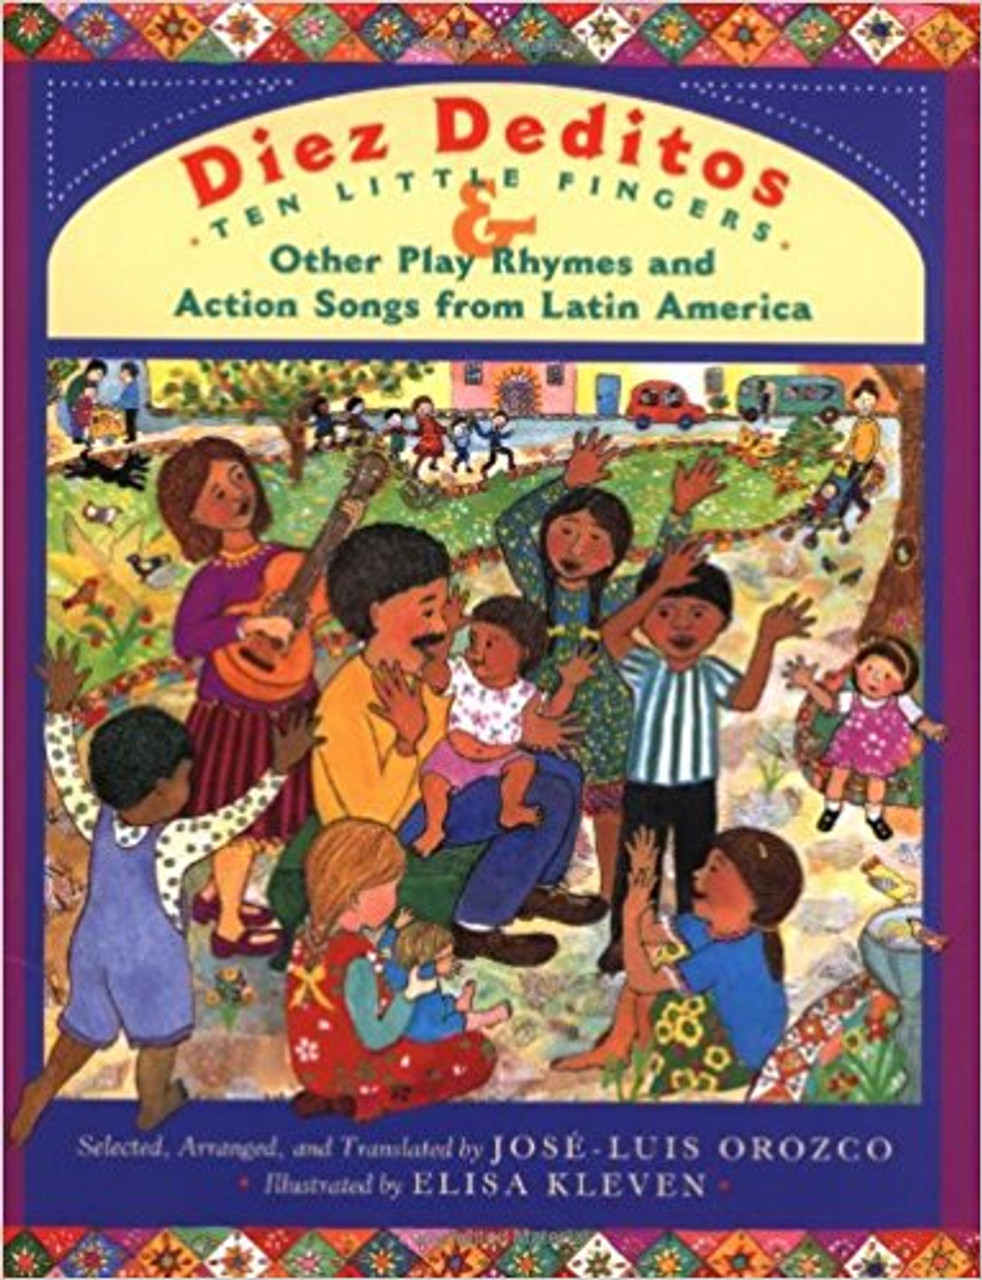 Diez Deditos and Other Play Rhymes and Action Songs from Latin America by Jose, Luis Orozco